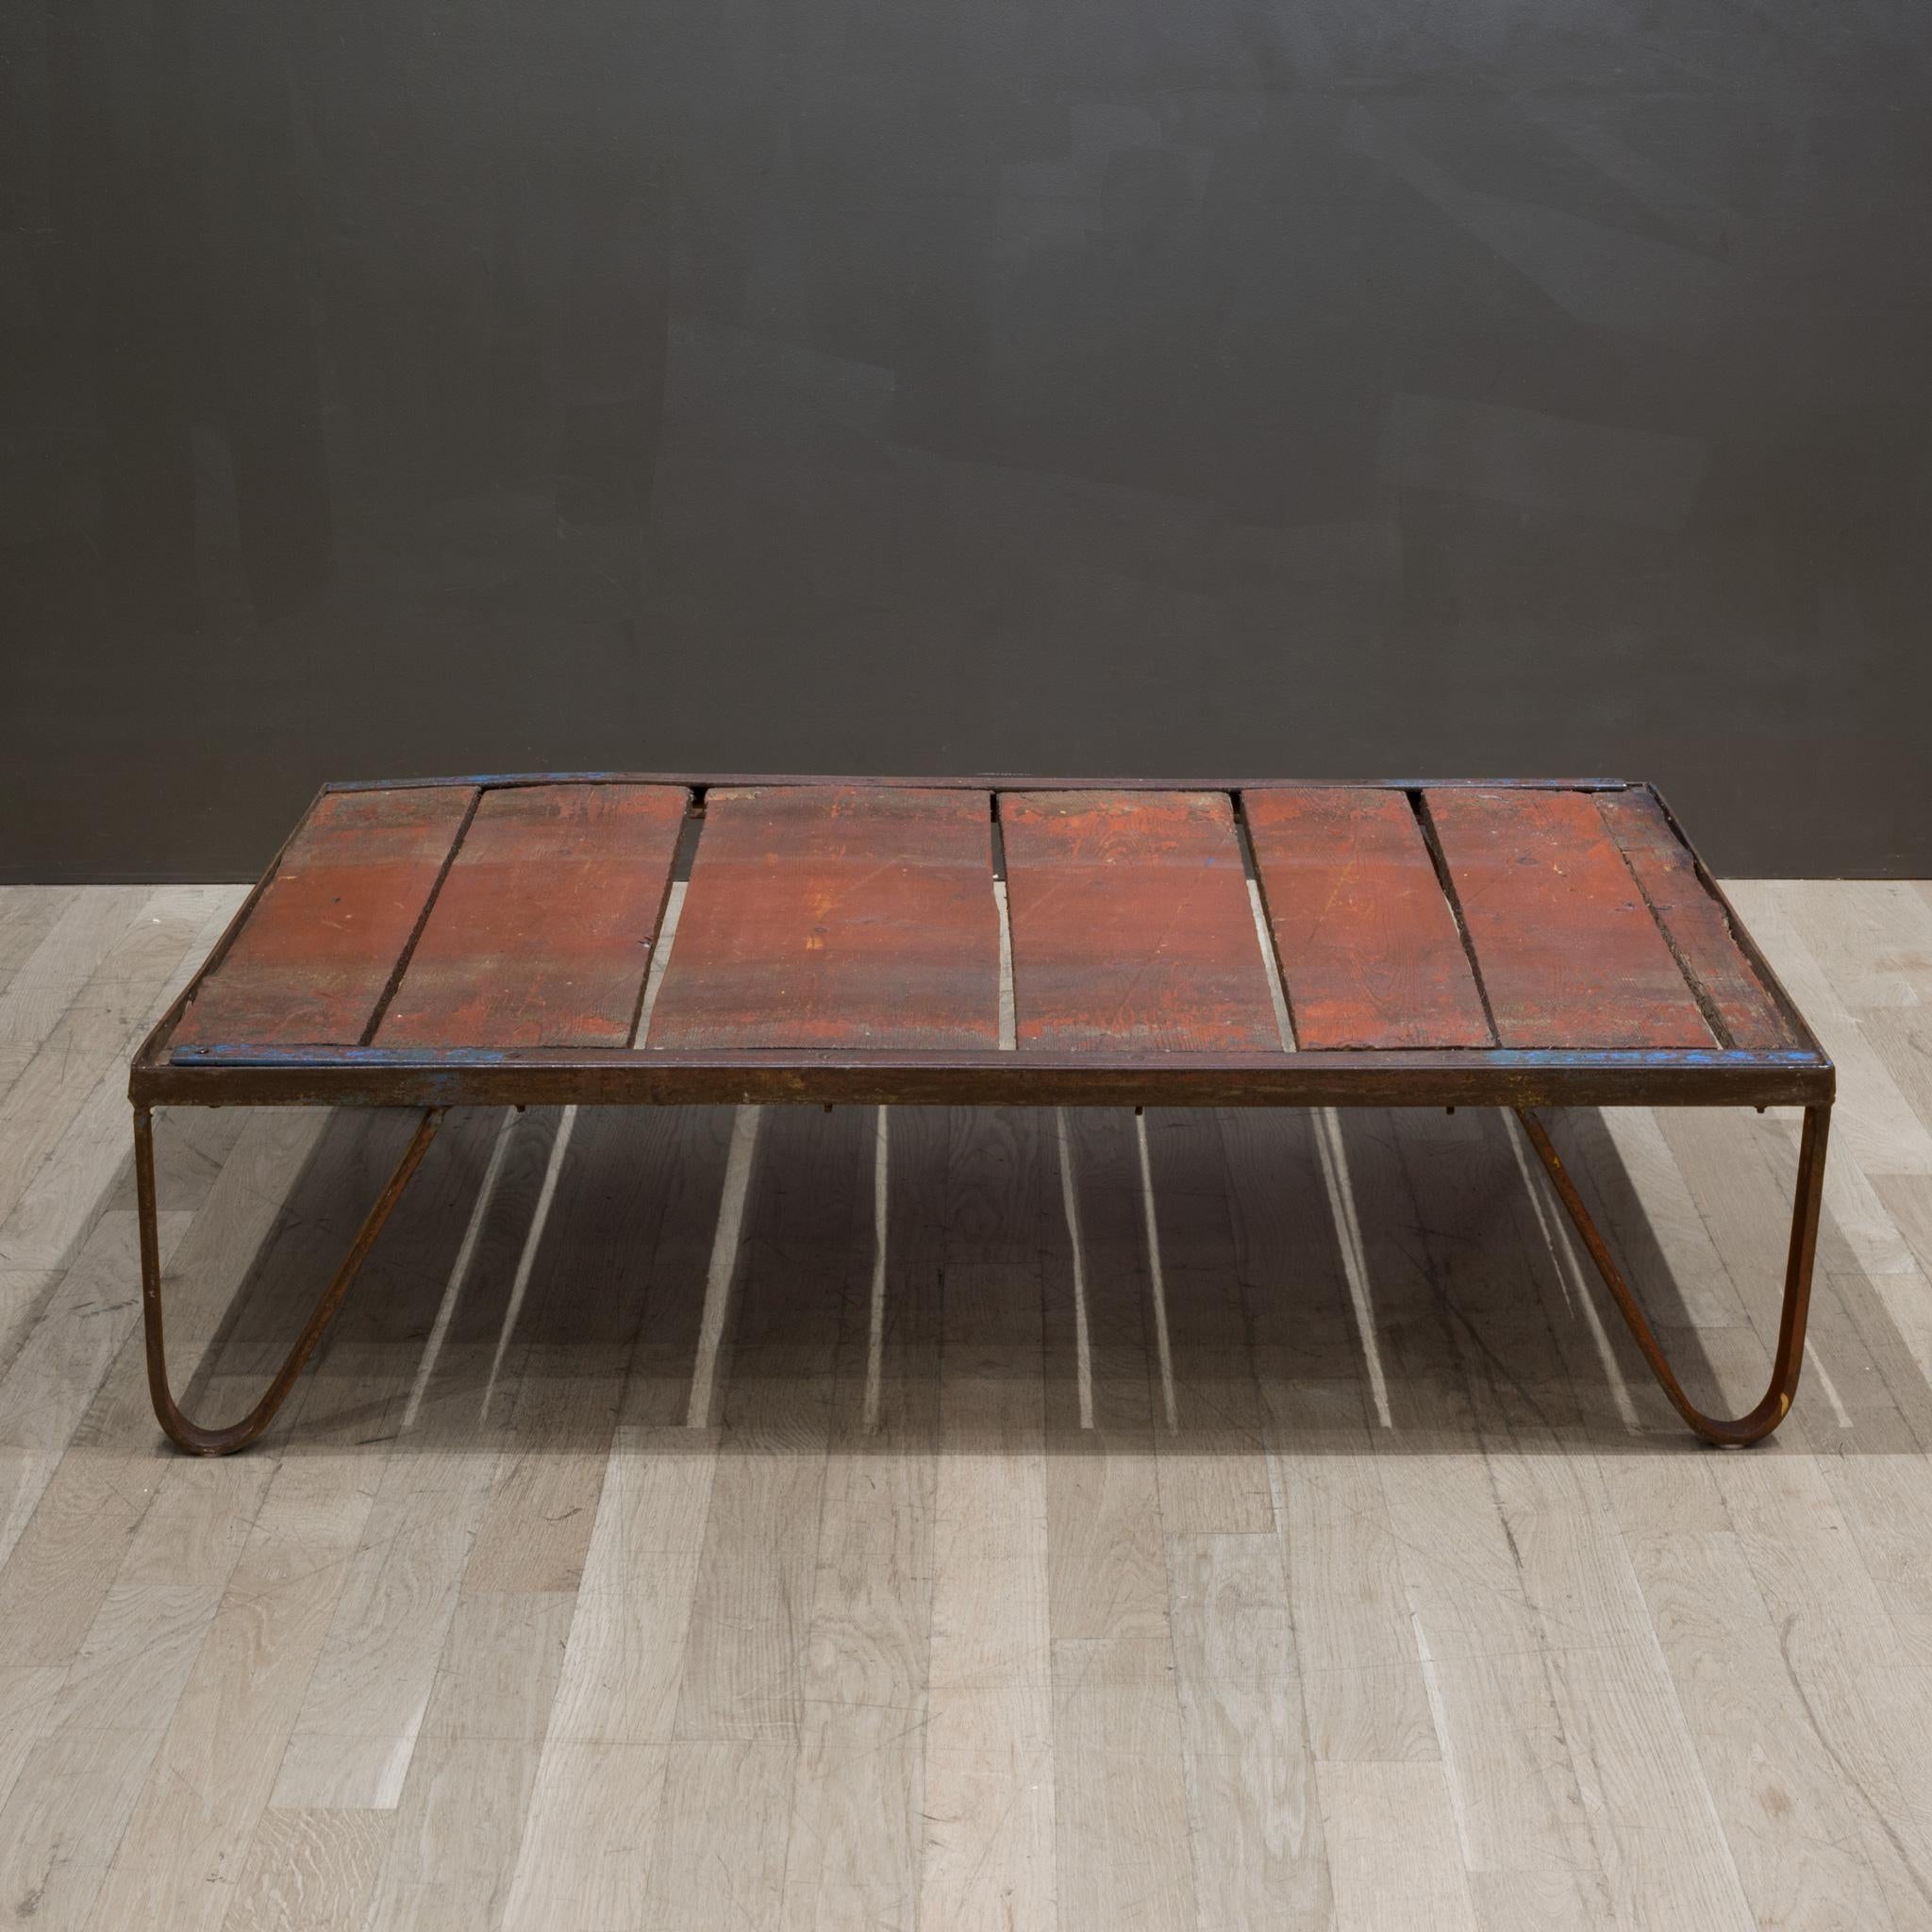 Rustic Early 20th c. Dutch Pallet Coffee Table, c.1940 For Sale